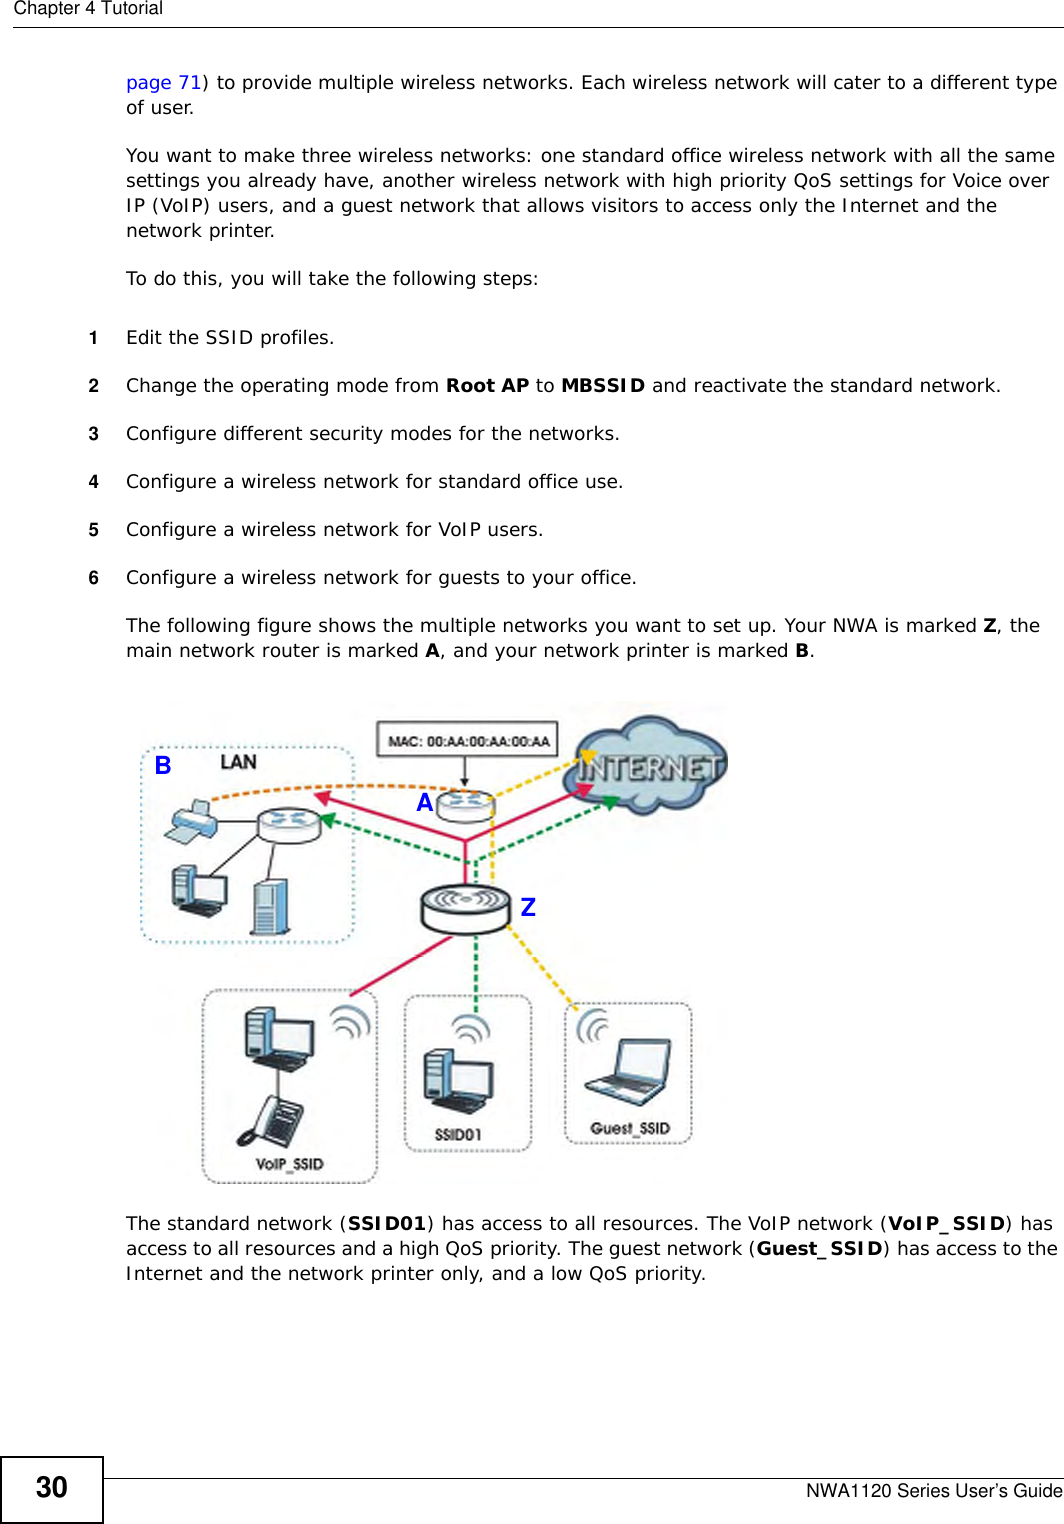 Chapter 4 TutorialNWA1120 Series User’s Guide30page 71) to provide multiple wireless networks. Each wireless network will cater to a different type of user.You want to make three wireless networks: one standard office wireless network with all the same settings you already have, another wireless network with high priority QoS settings for Voice over IP (VoIP) users, and a guest network that allows visitors to access only the Internet and the network printer.To do this, you will take the following steps:1Edit the SSID profiles.2Change the operating mode from Root AP to MBSSID and reactivate the standard network.3Configure different security modes for the networks.4Configure a wireless network for standard office use.5Configure a wireless network for VoIP users.6Configure a wireless network for guests to your office.The following figure shows the multiple networks you want to set up. Your NWA is marked Z, the main network router is marked A, and your network printer is marked B.The standard network (SSID01) has access to all resources. The VoIP network (VoIP_SSID) has access to all resources and a high QoS priority. The guest network (Guest_SSID) has access to the Internet and the network printer only, and a low QoS priority.ZAB